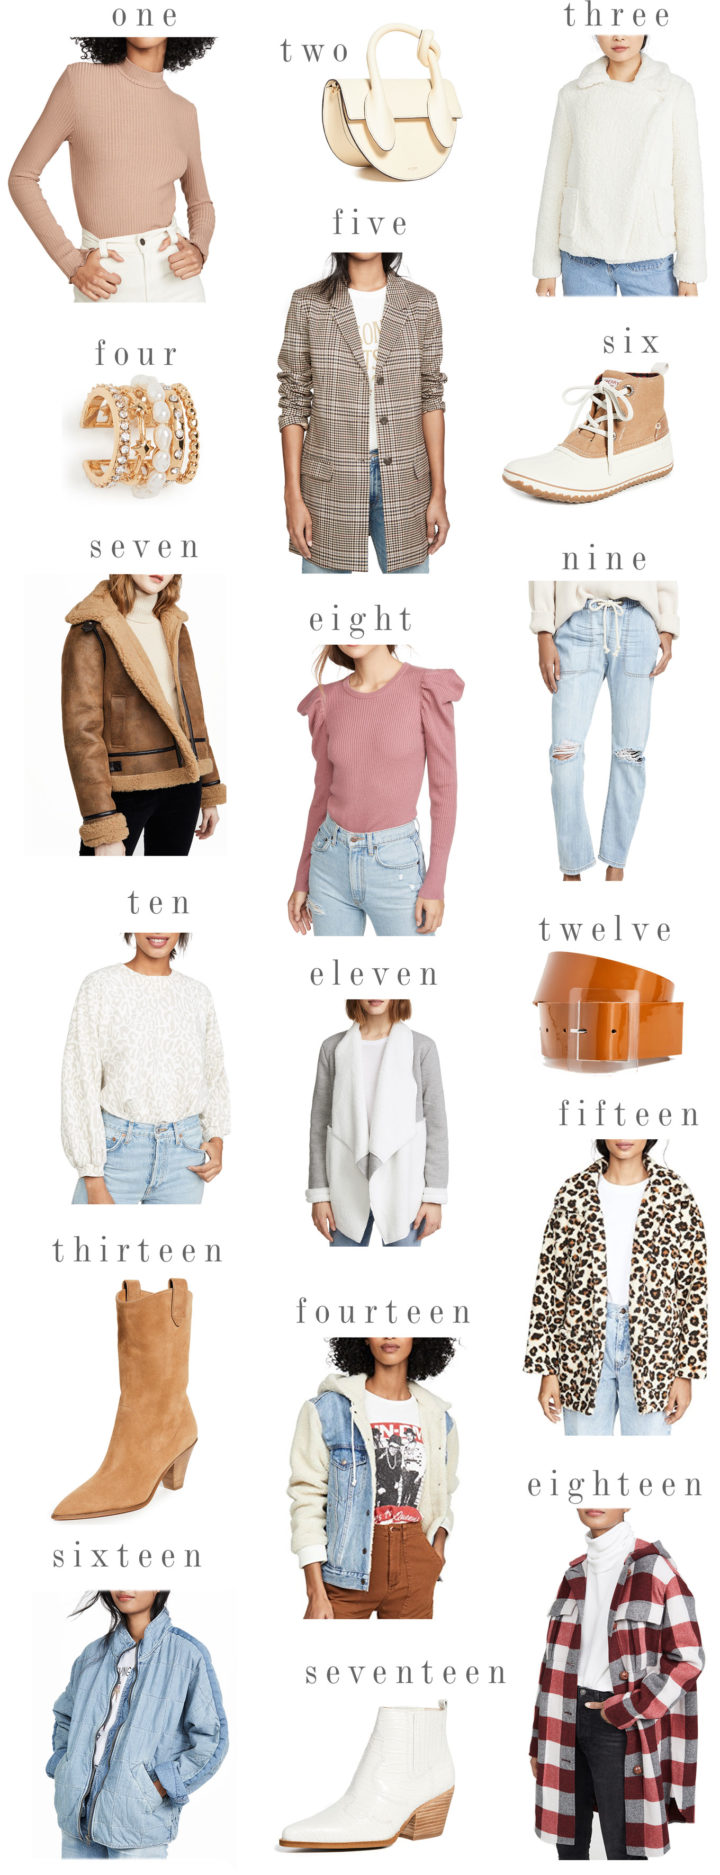 FALL TRENDS